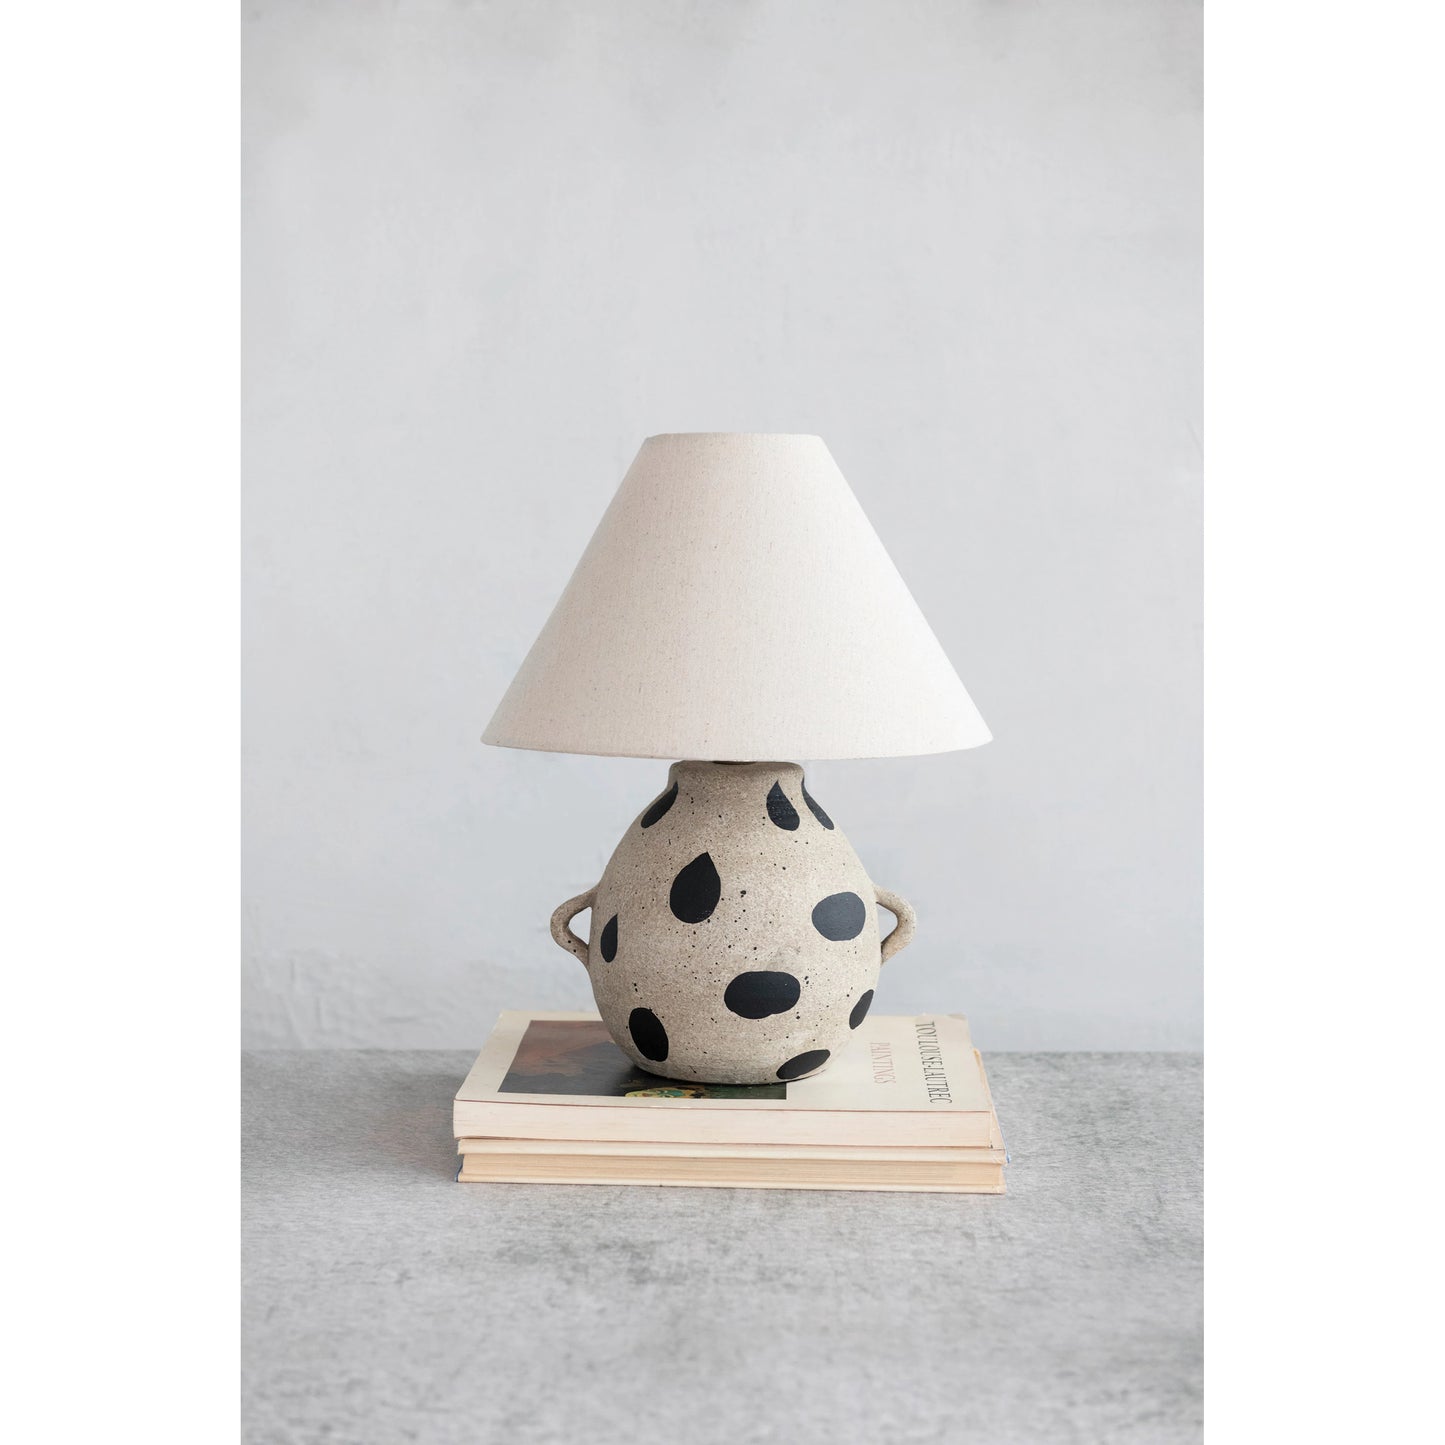 Hand-Painted Terra-cotta Table Lamp with Dots and Fabric Shade